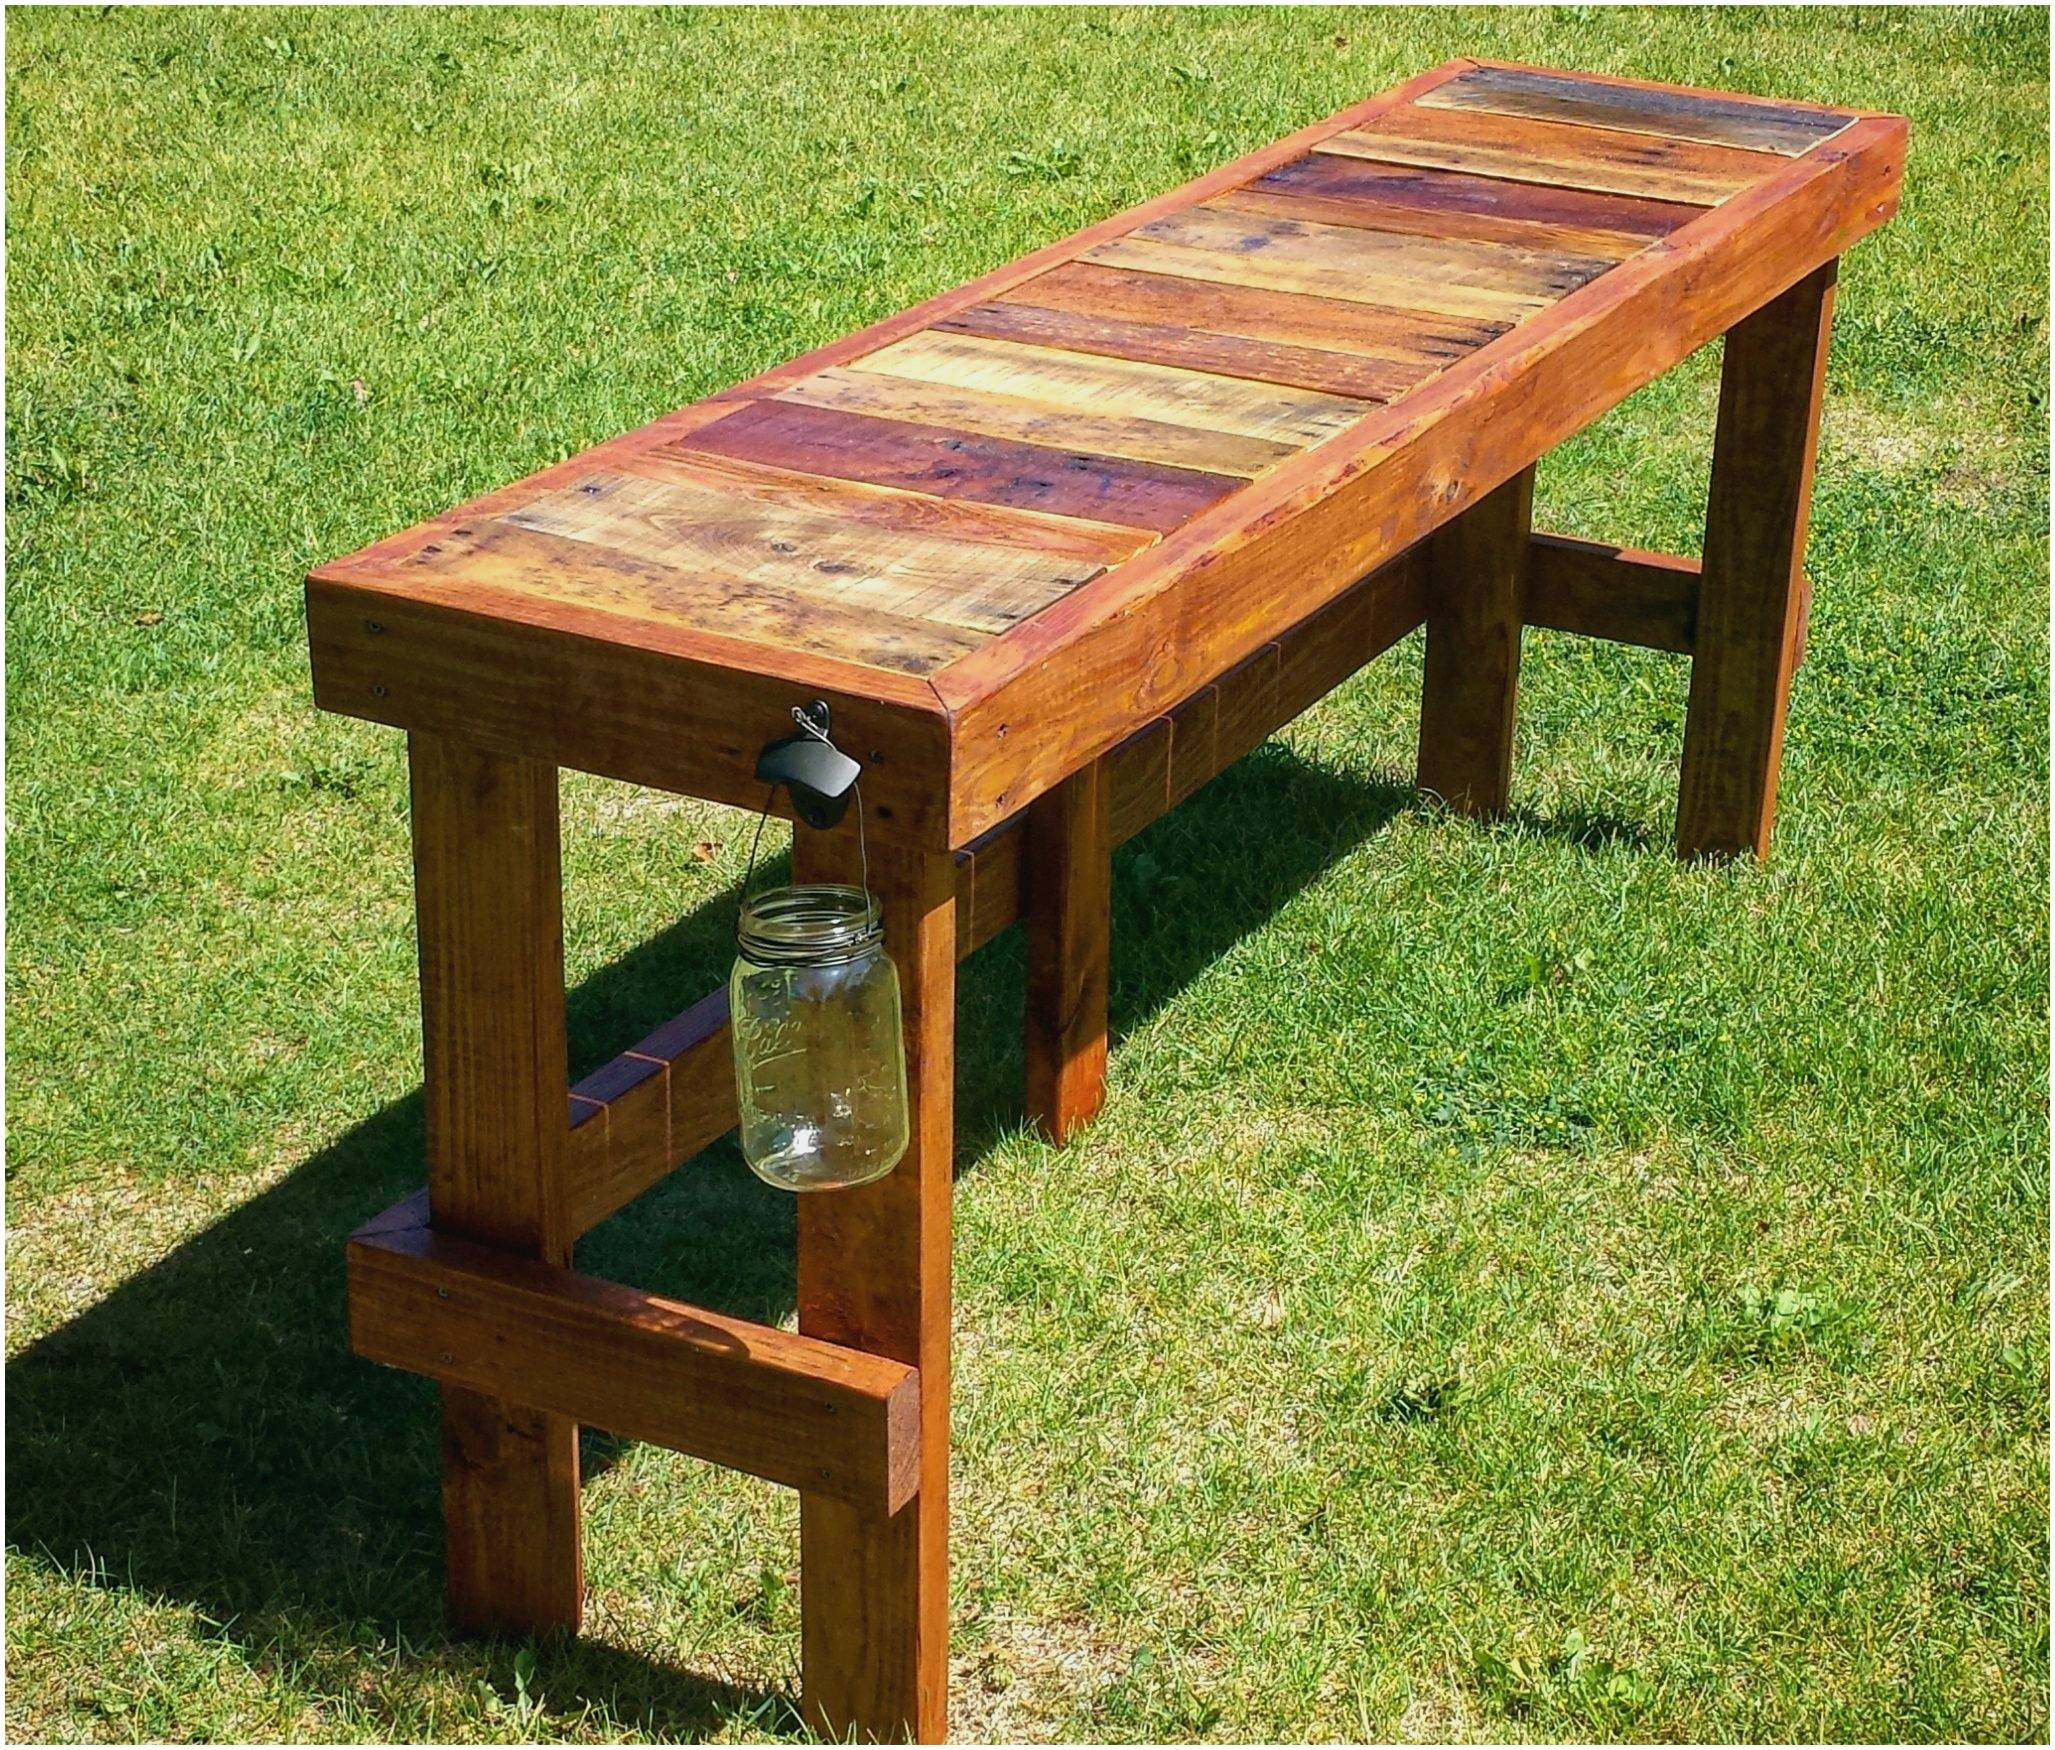 hardwood floor stain colors lowes of 37 best potting table lowes design page 2 tedxvermilionstreet org inside at lowes newyorkrevolution in this instructable i ll demonstrate how to build an outdoor bar table with a reclaimed